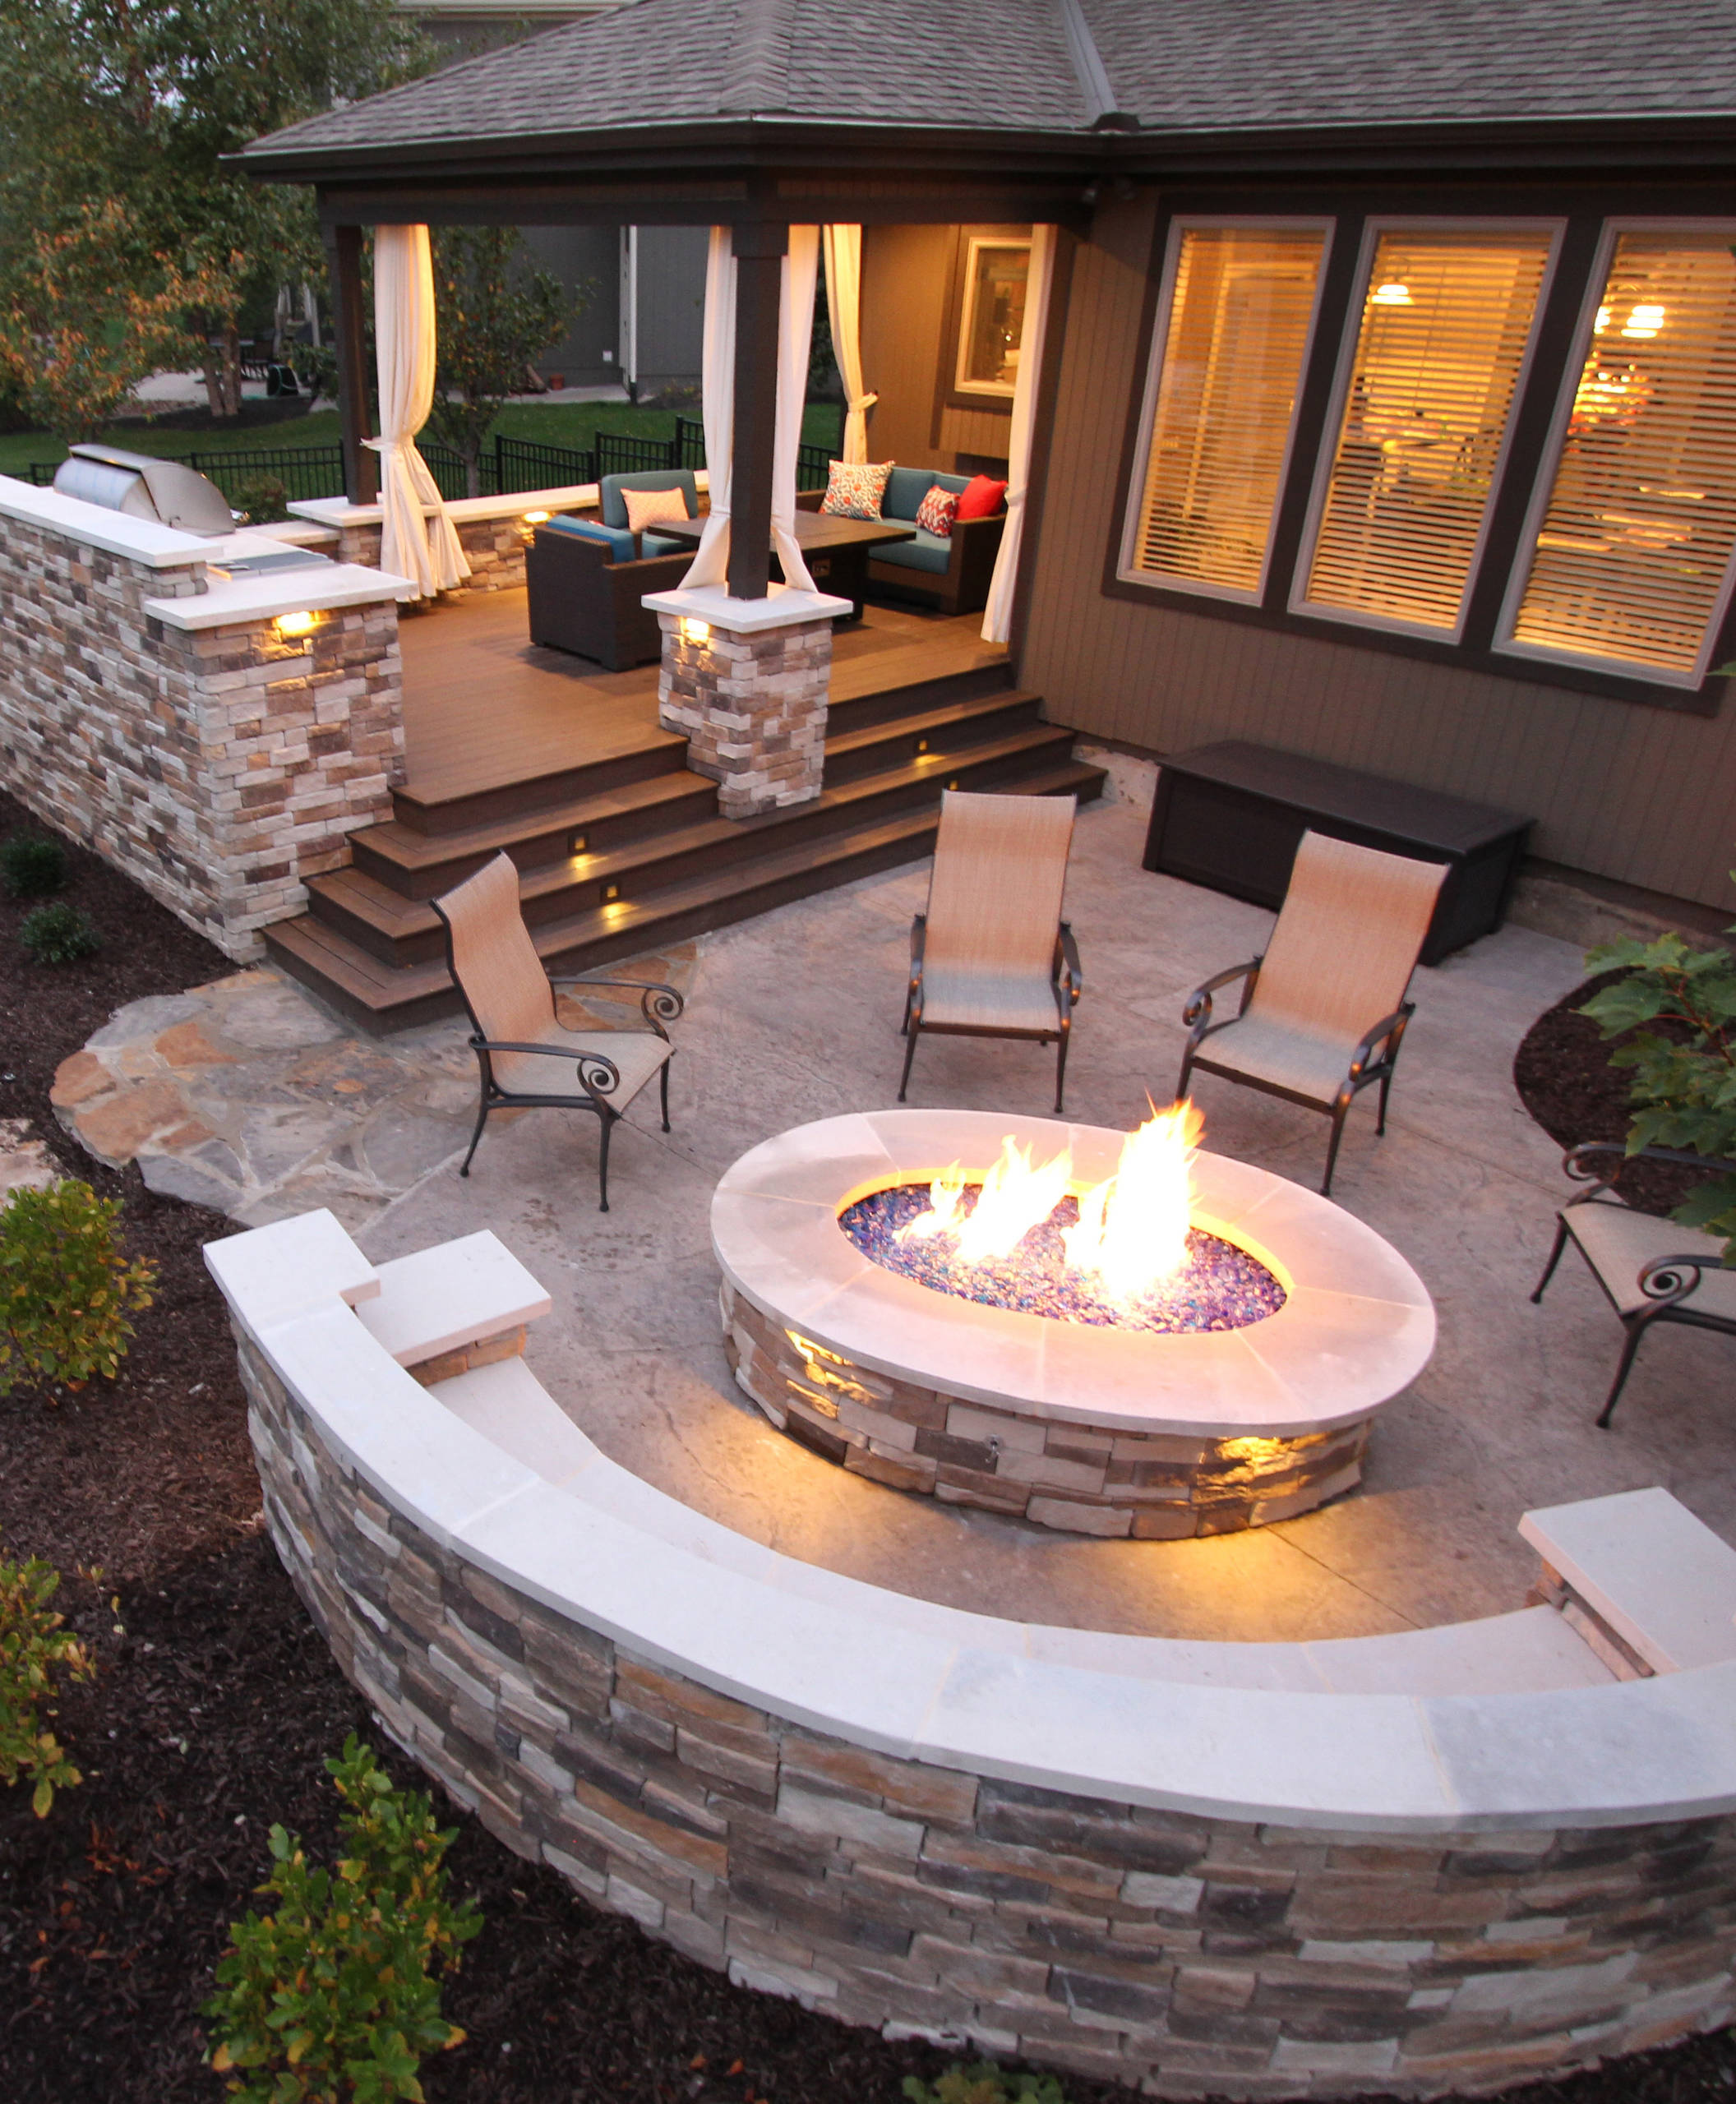 18 Beautiful Stamped Concrete Patio Design Ideas & Pictures   Houzz